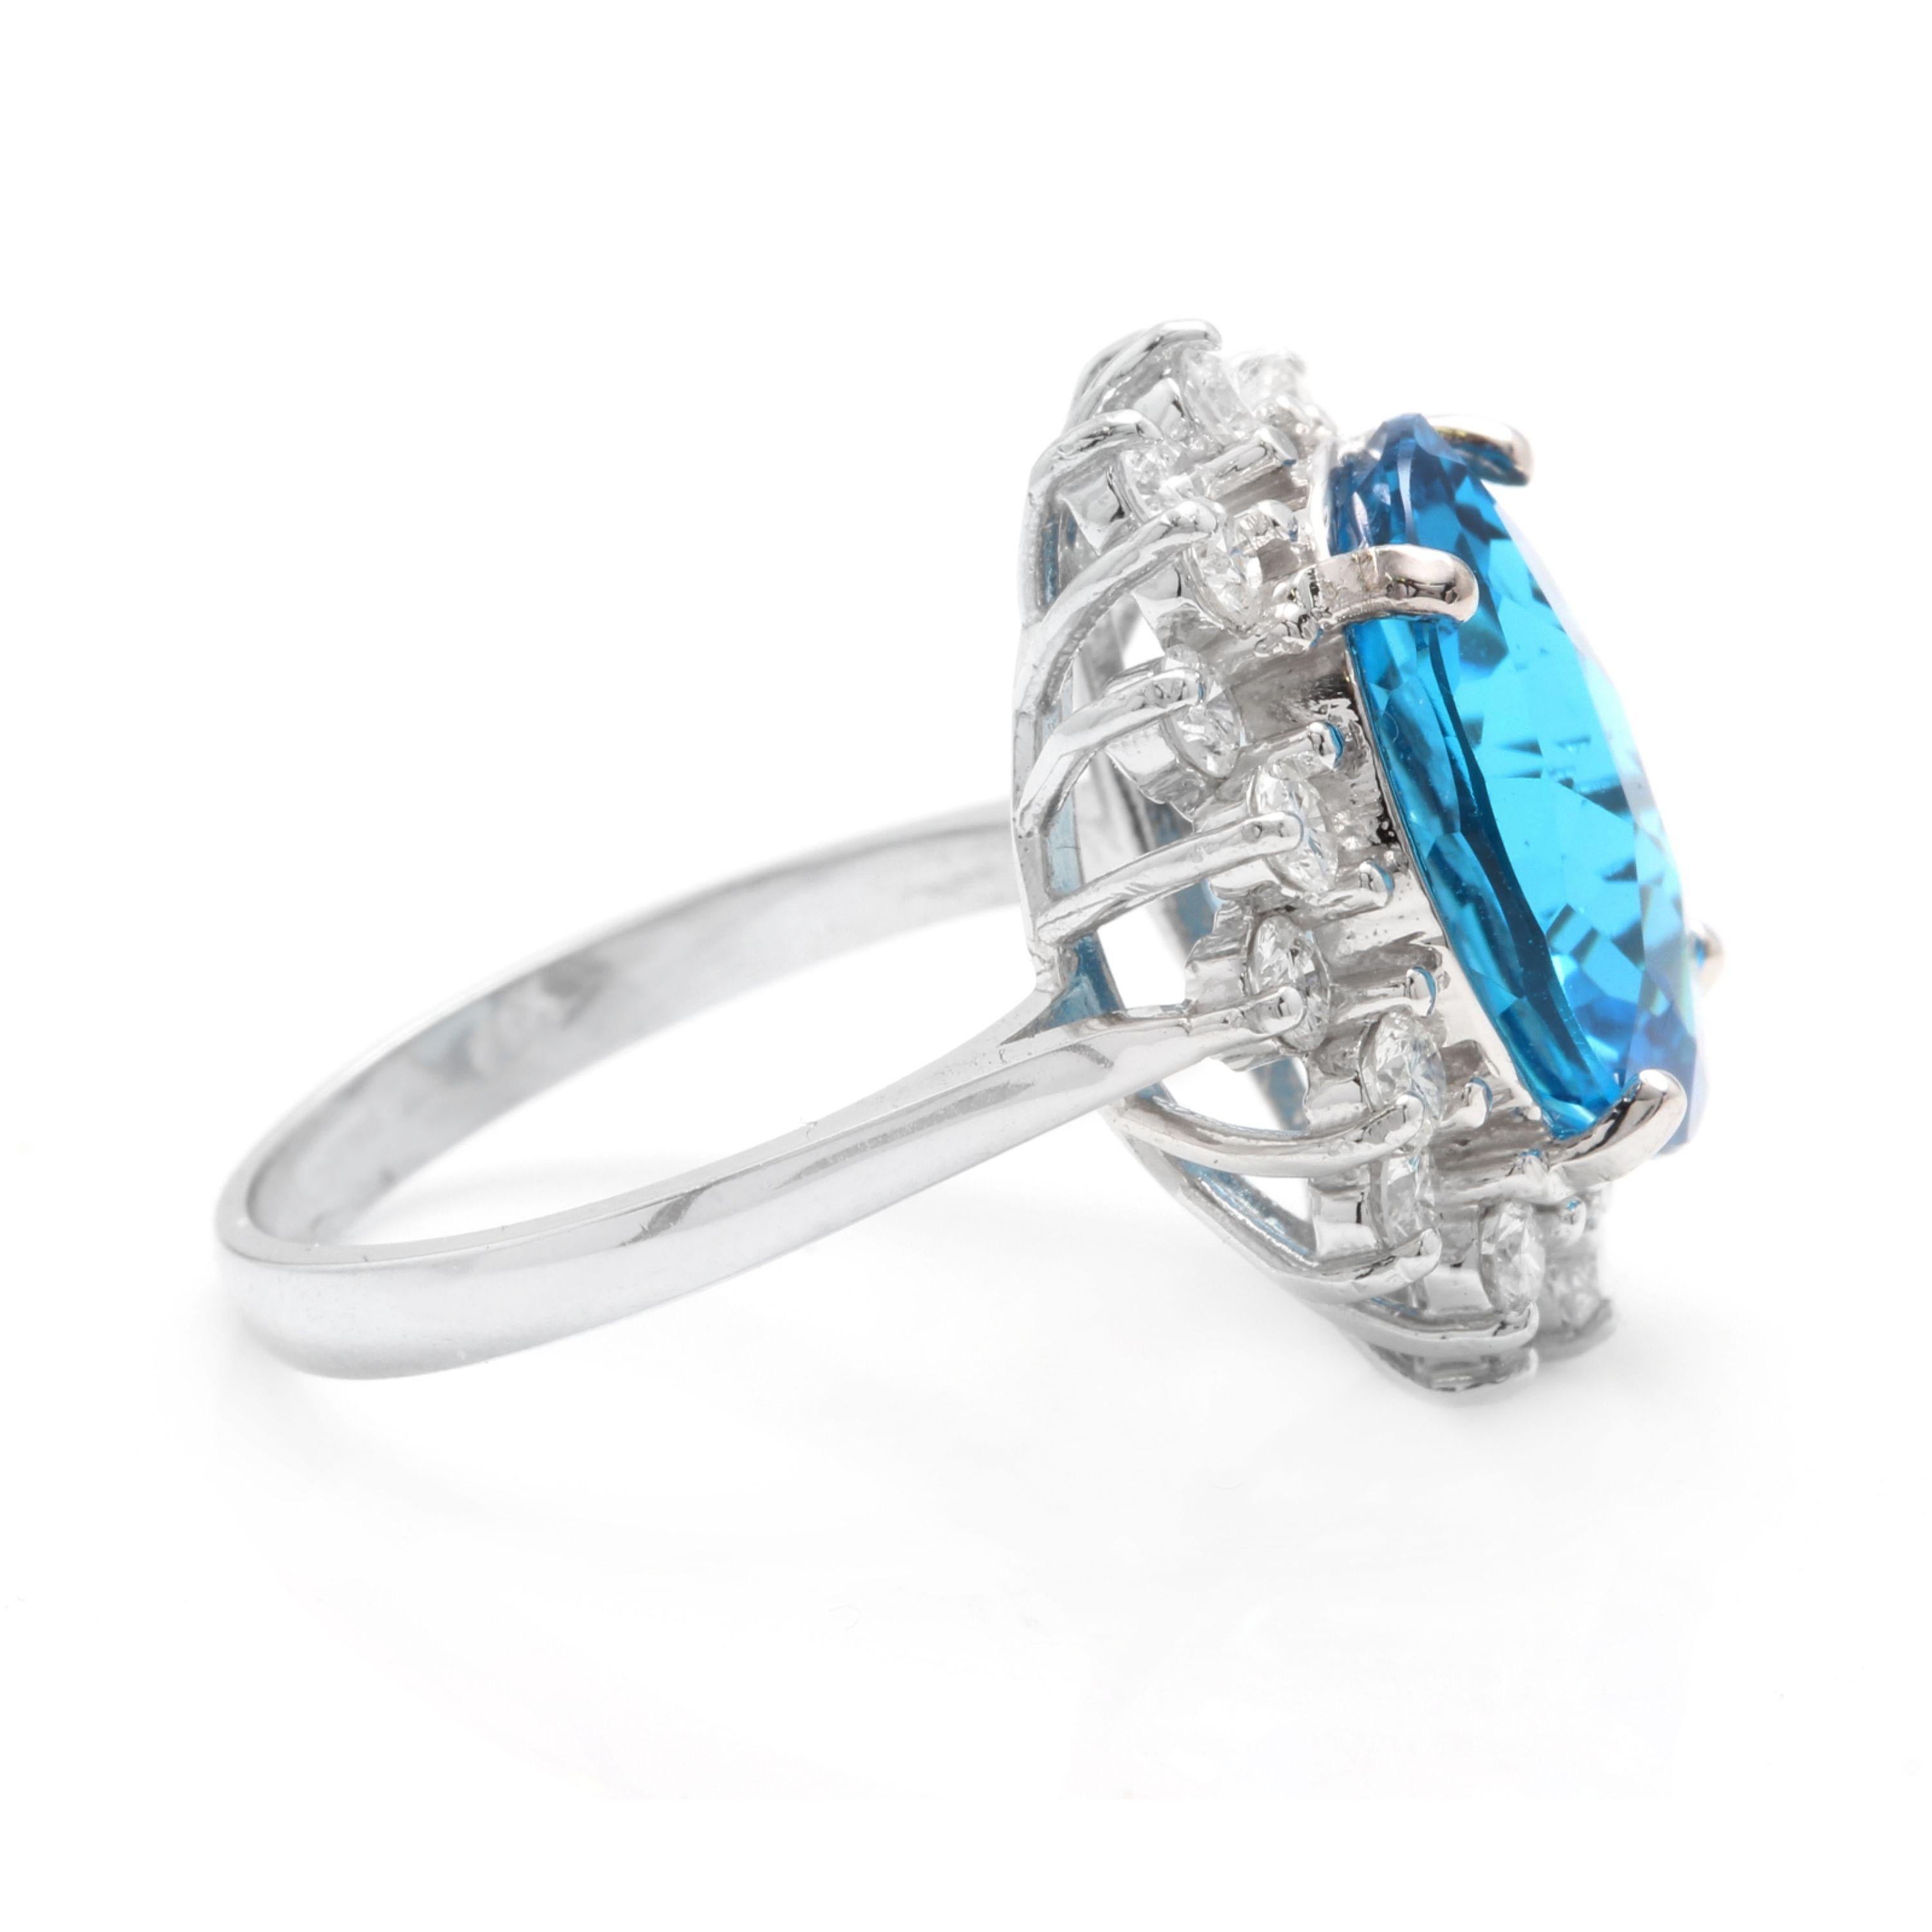 Mixed Cut 11.05 Ct Impressive Natural Swiss Blue Topaz & Diamond 14K Solid White Gold Ring For Sale